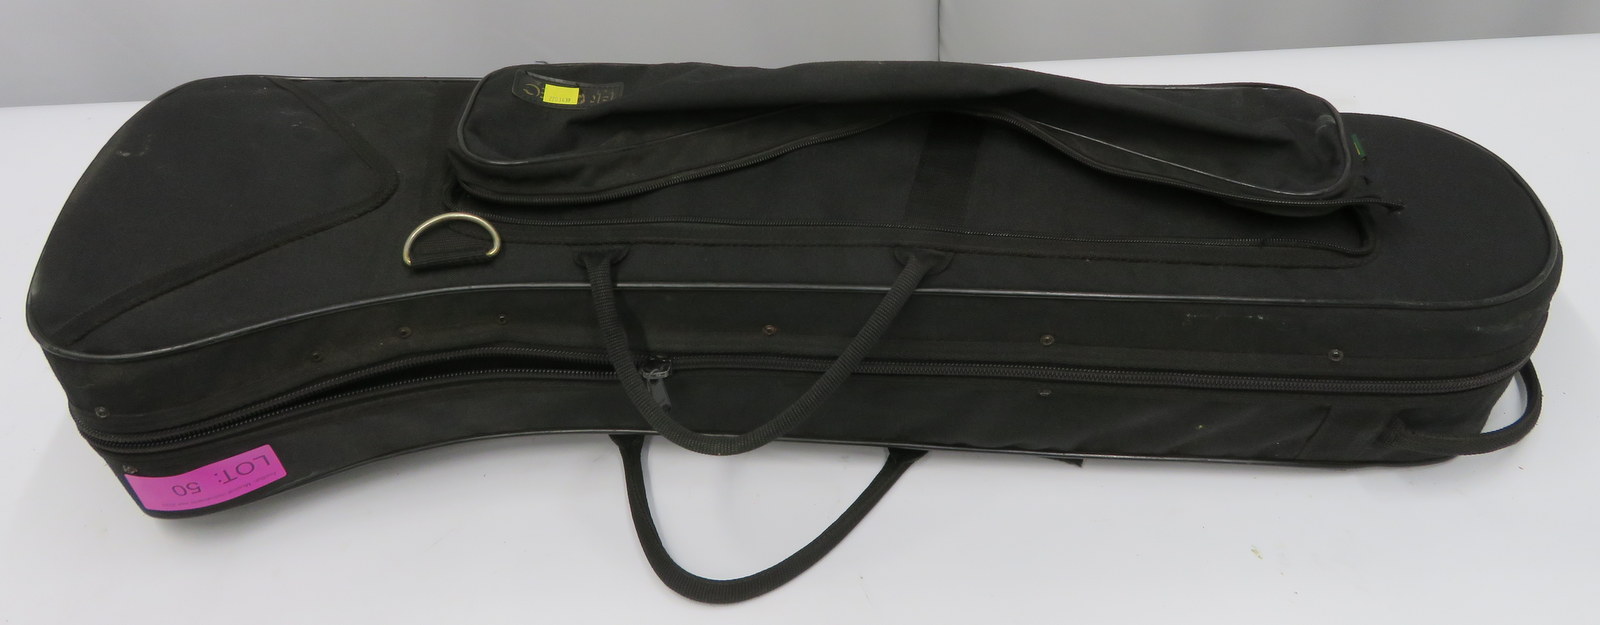 Rath R4 trombone with case. Serial number: R4144. - Image 16 of 16